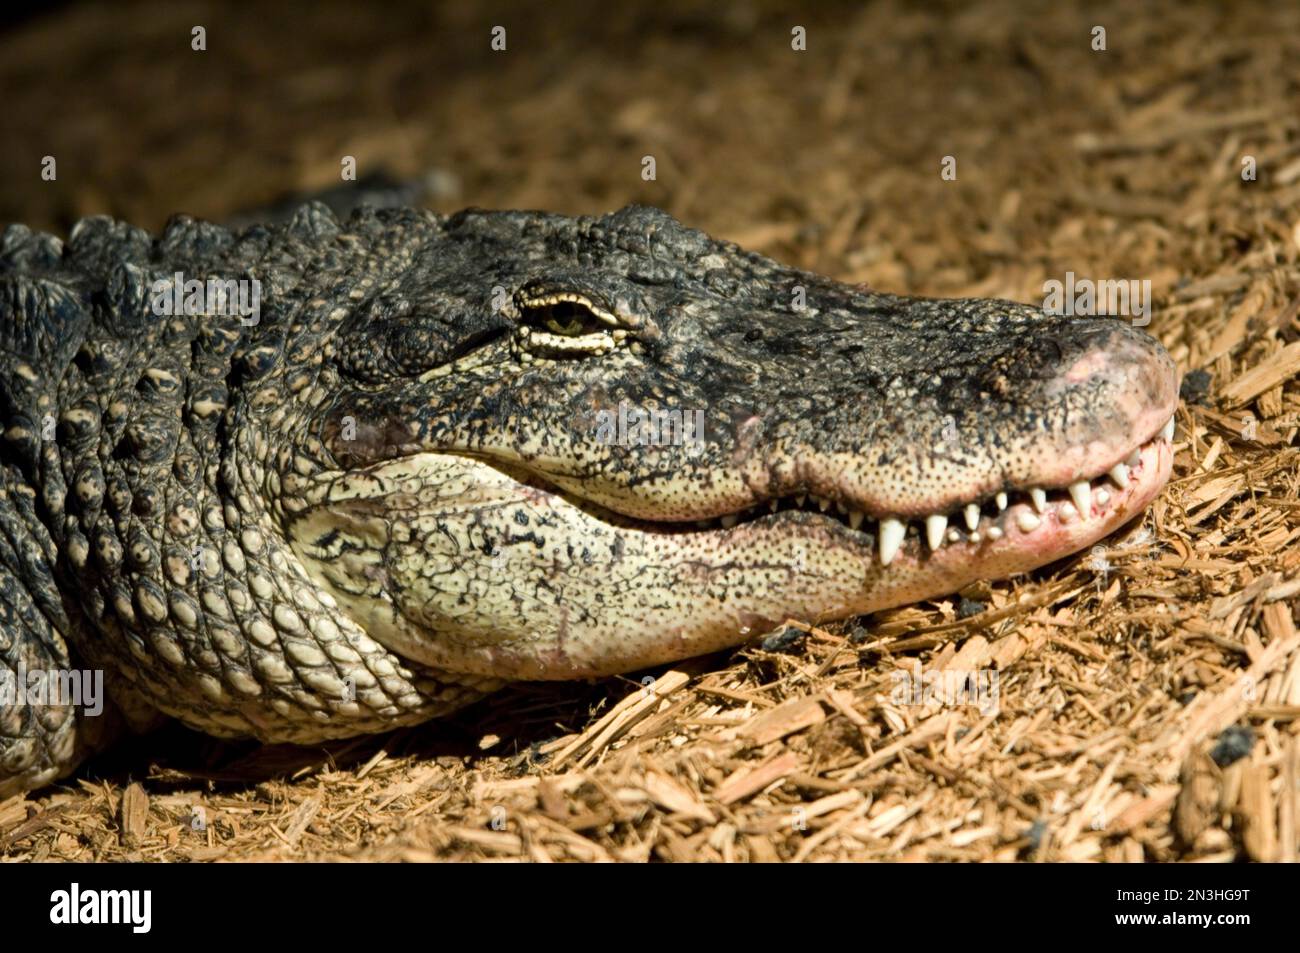 An American alligator (Alligator mississippiensis) shows his teeth as he lays on wood chips in an enclosure at a zoo Stock Photo